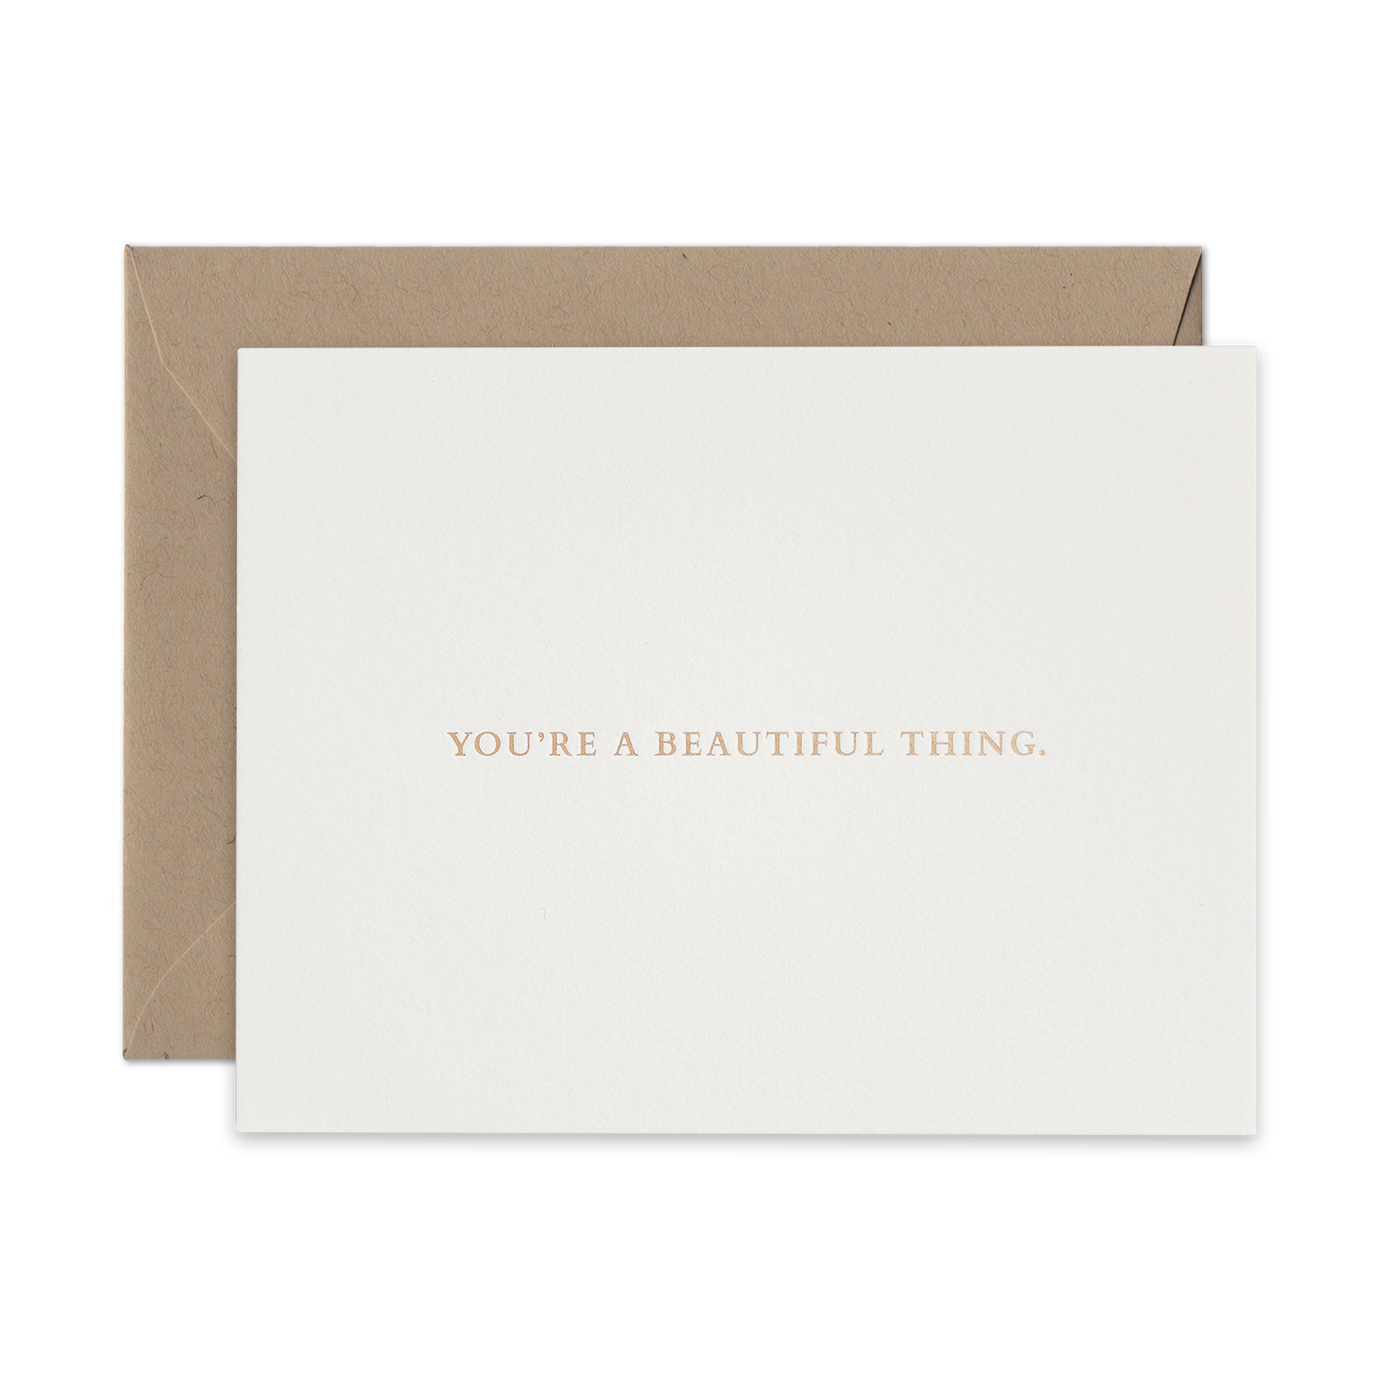 Gold foil letterpress greeting card by beknown. You're a beautiful thing.